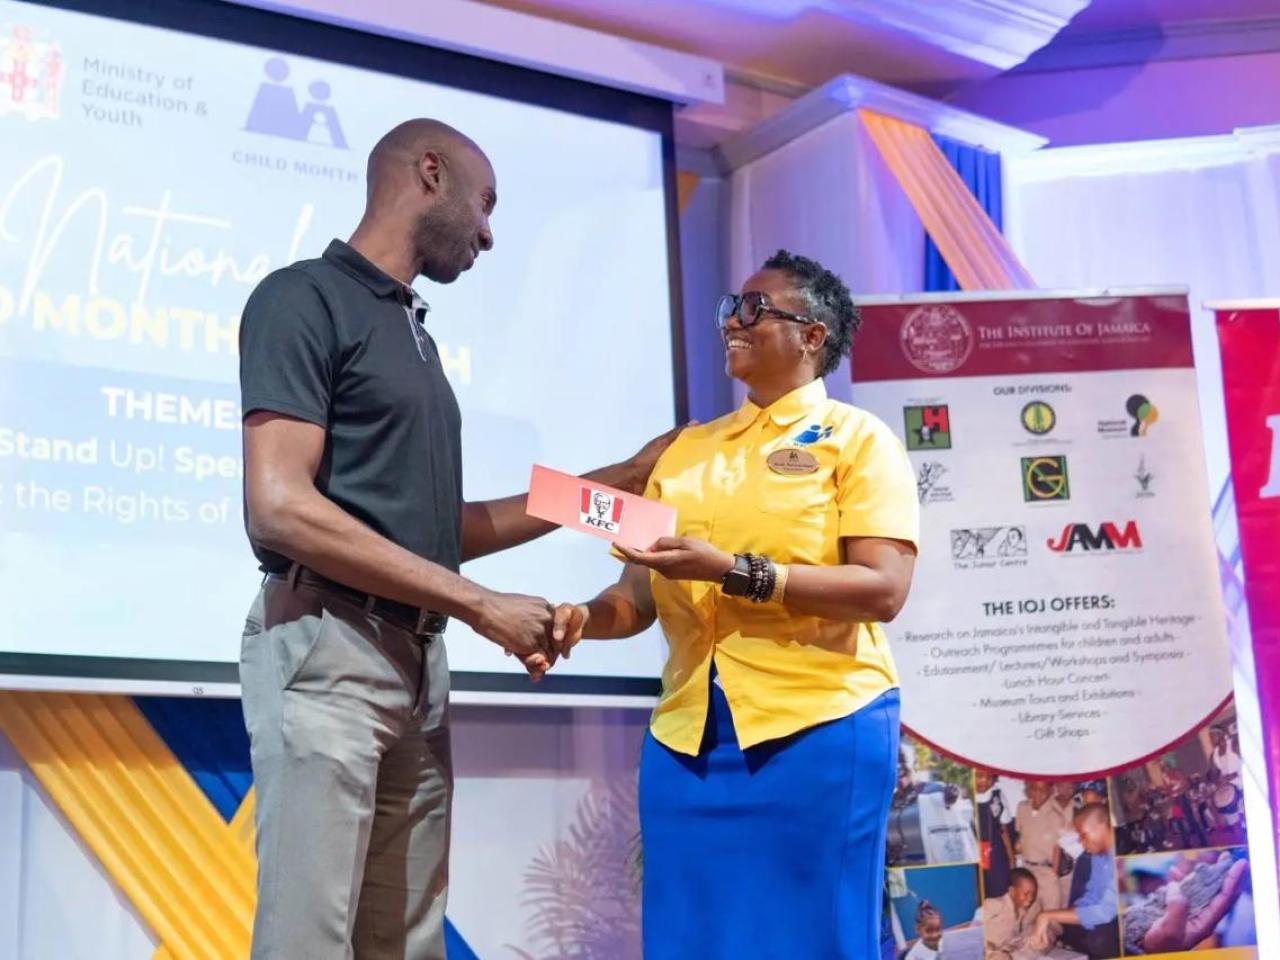 Restaurants of Jamaica Brand Manager Andrei Roper (left) presents a symbolic cheque to National Child Month Committee Chairperson Nicole Patrick-Shaw, during the National Child Month Launch.